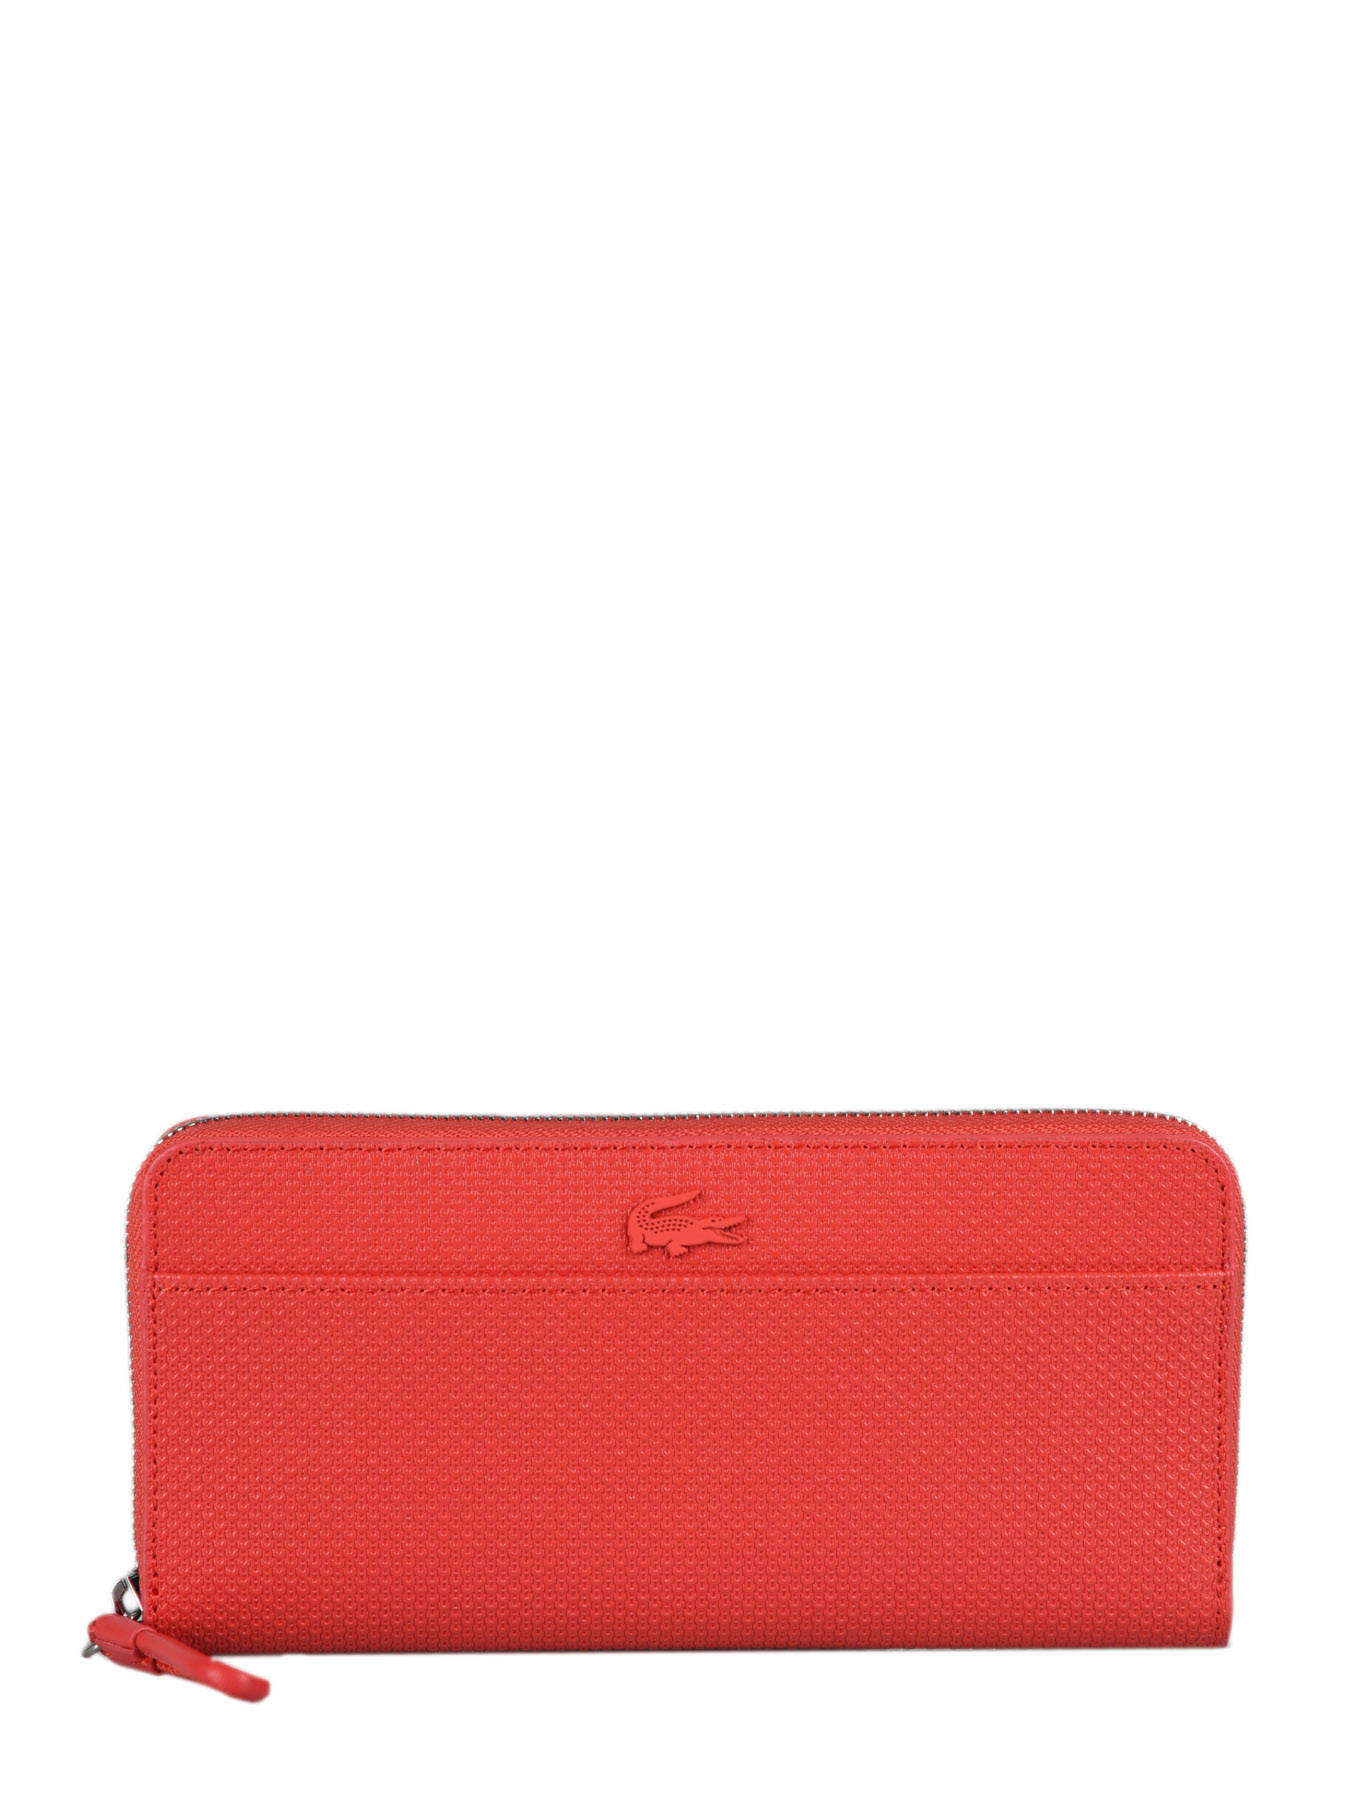 Lacoste Wallet NF.3219.CE - best prices